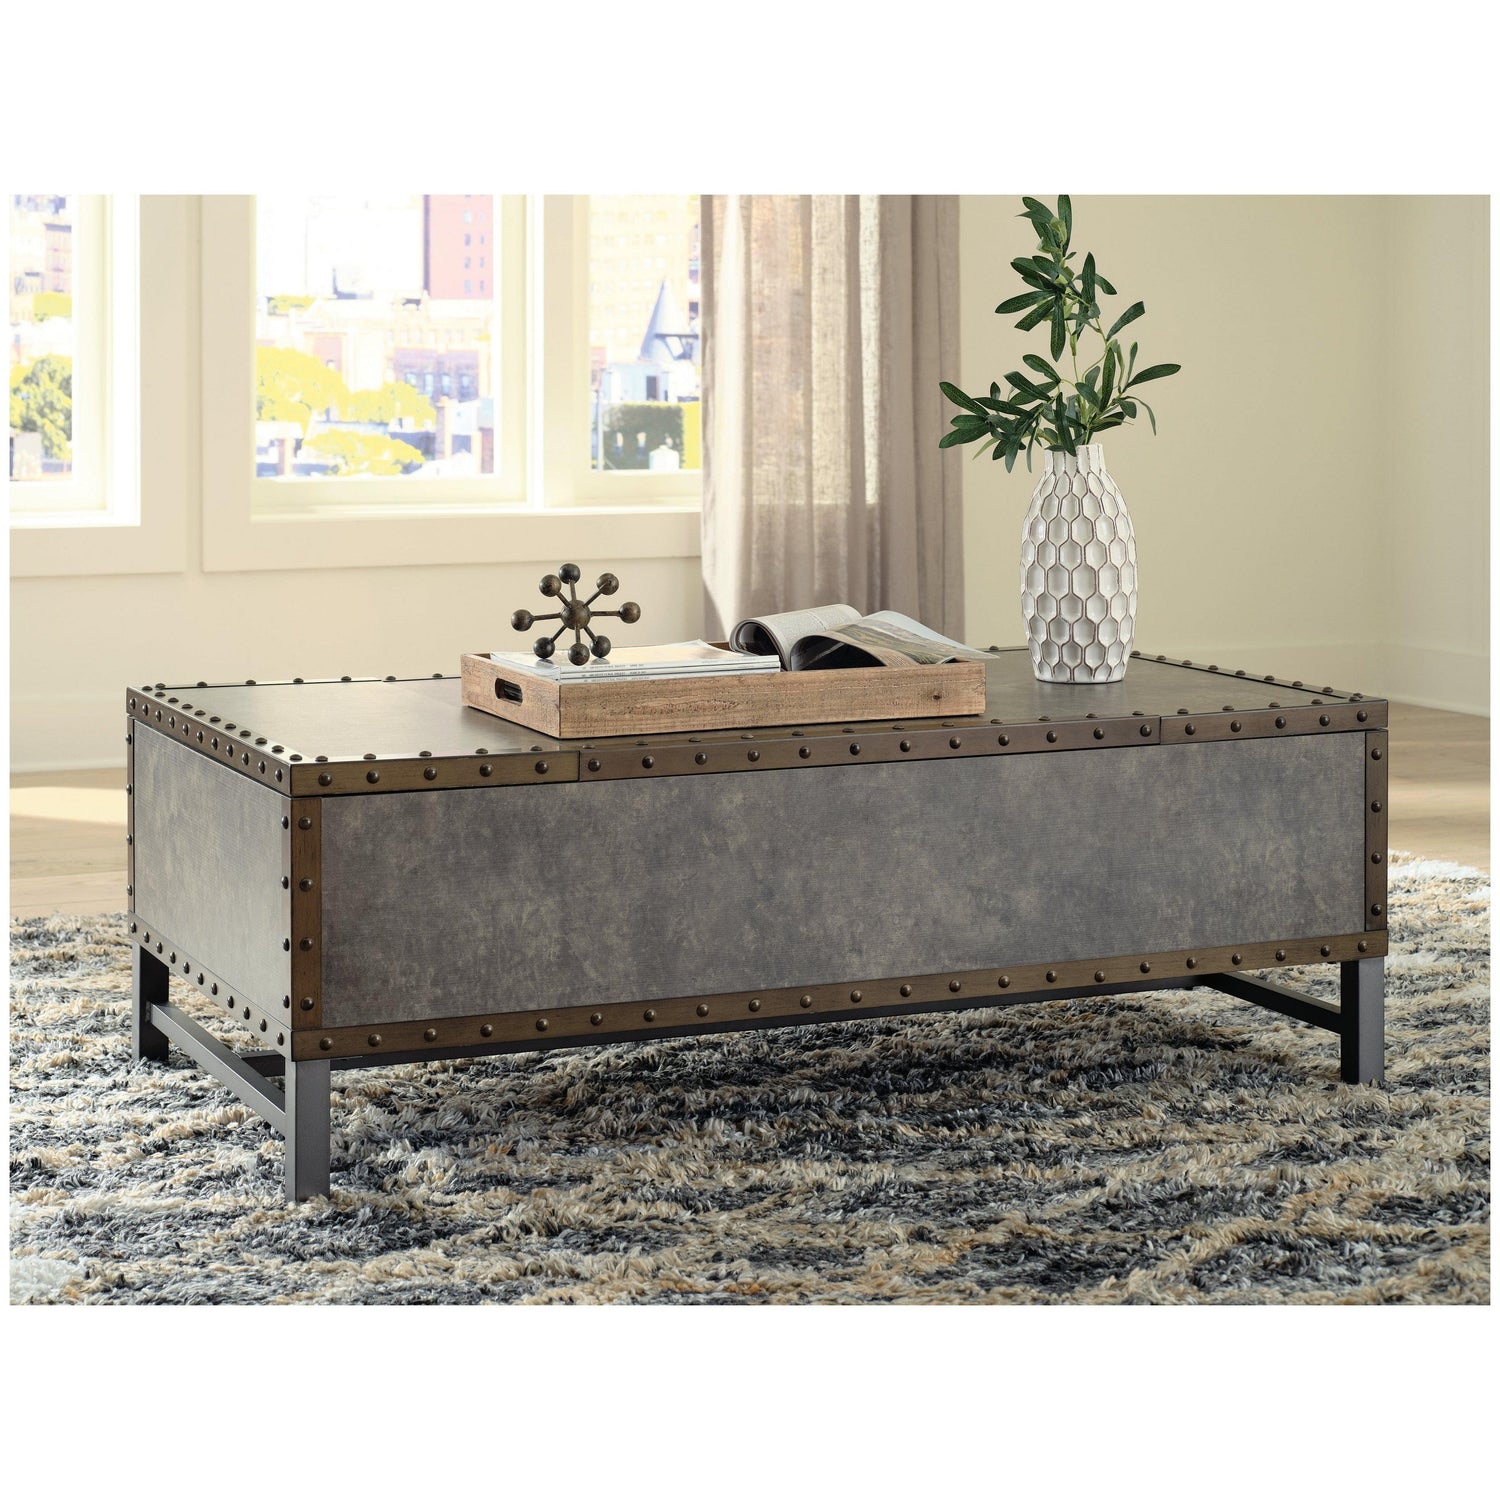 Derrylin Lift-Top Coffee Table Ash-T973-9